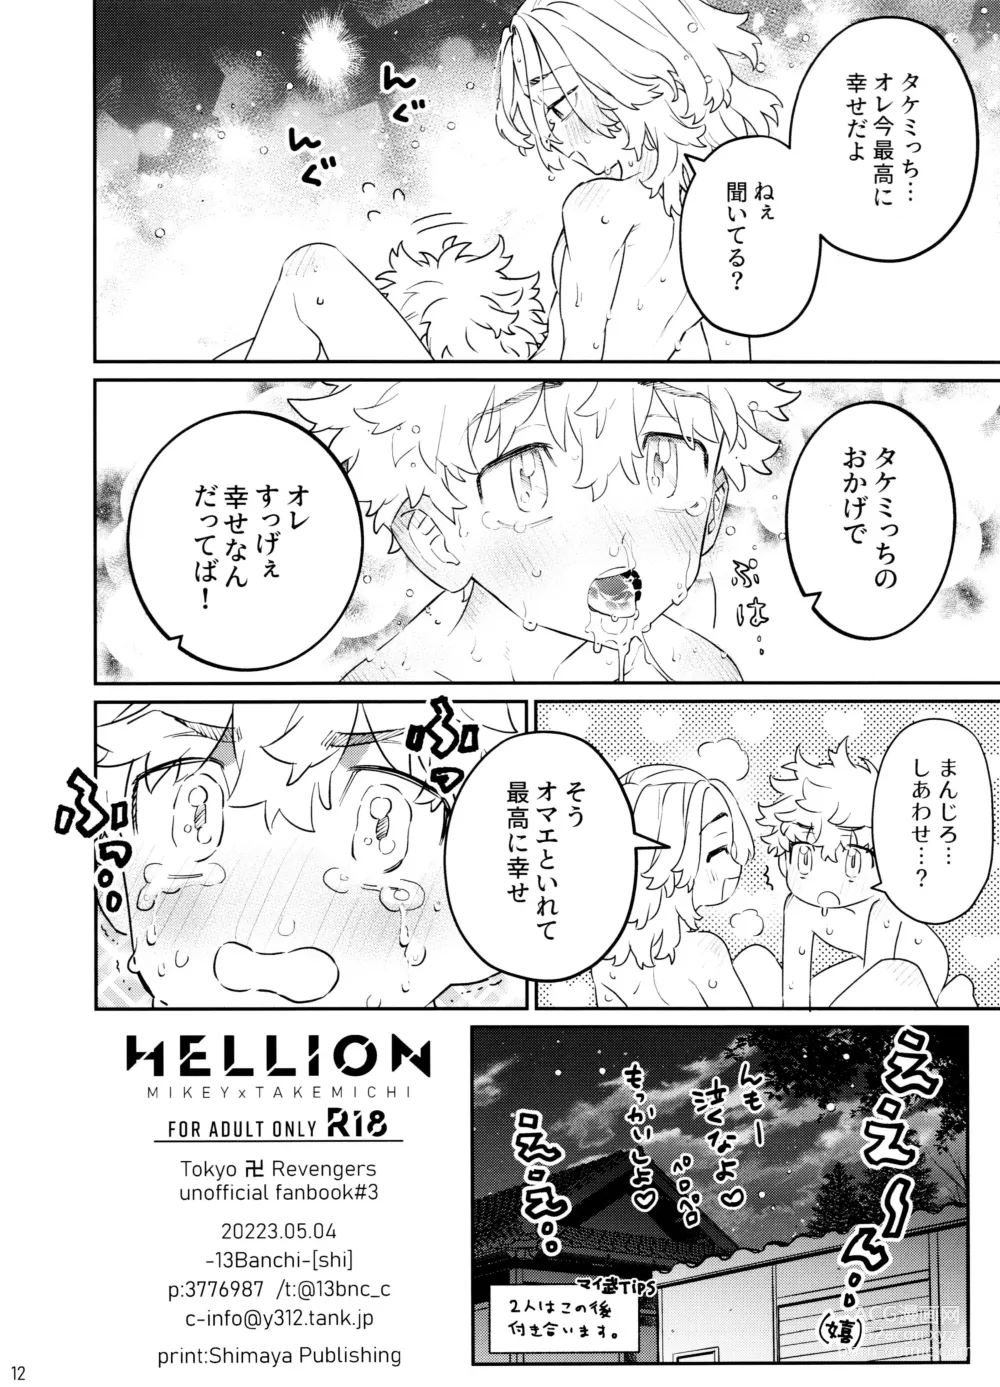 Page 12 of doujinshi HELLION